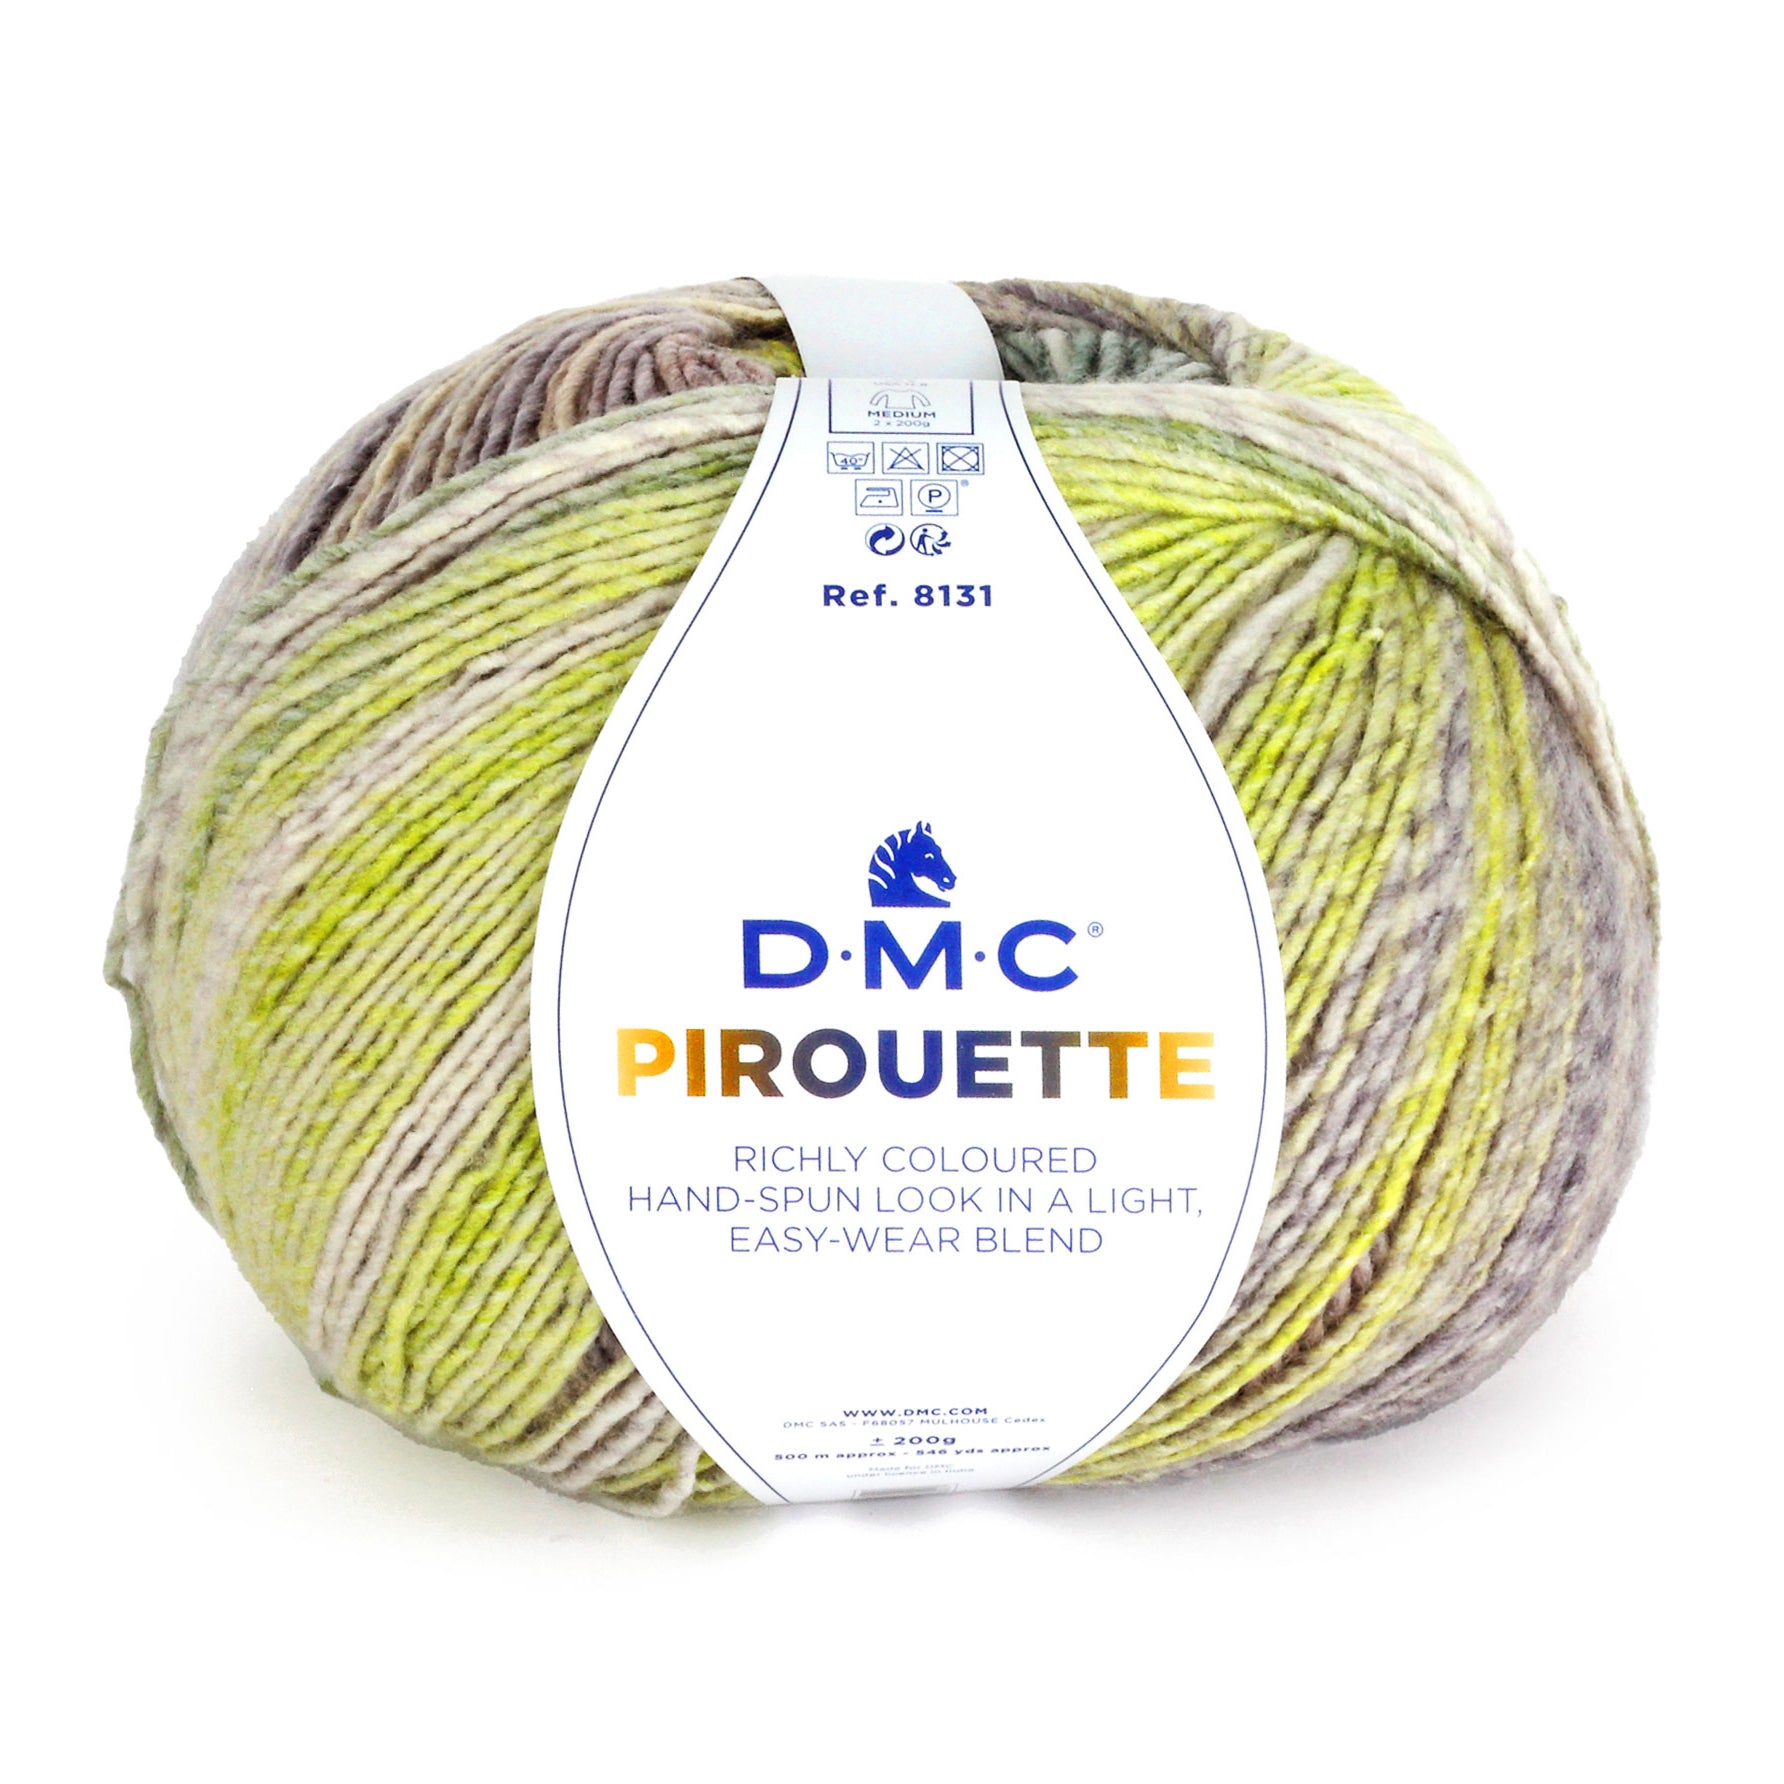 DMC Pirouette: multicolor yarn perfect for autumn and winter work